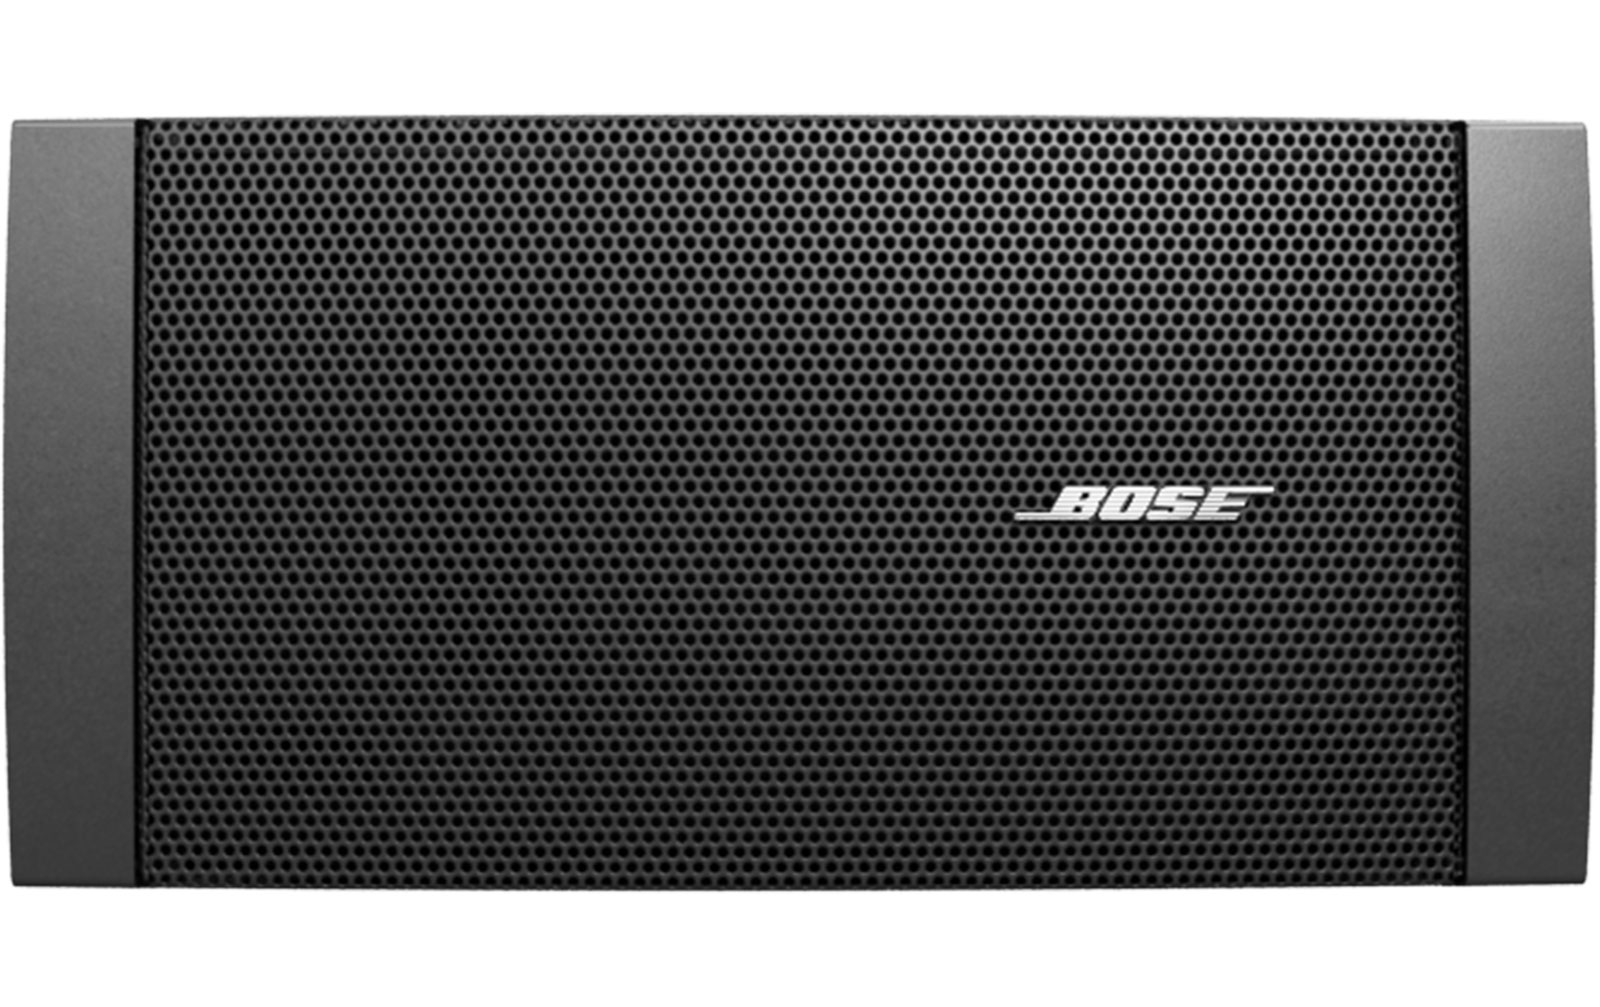 bose space ds 40se price